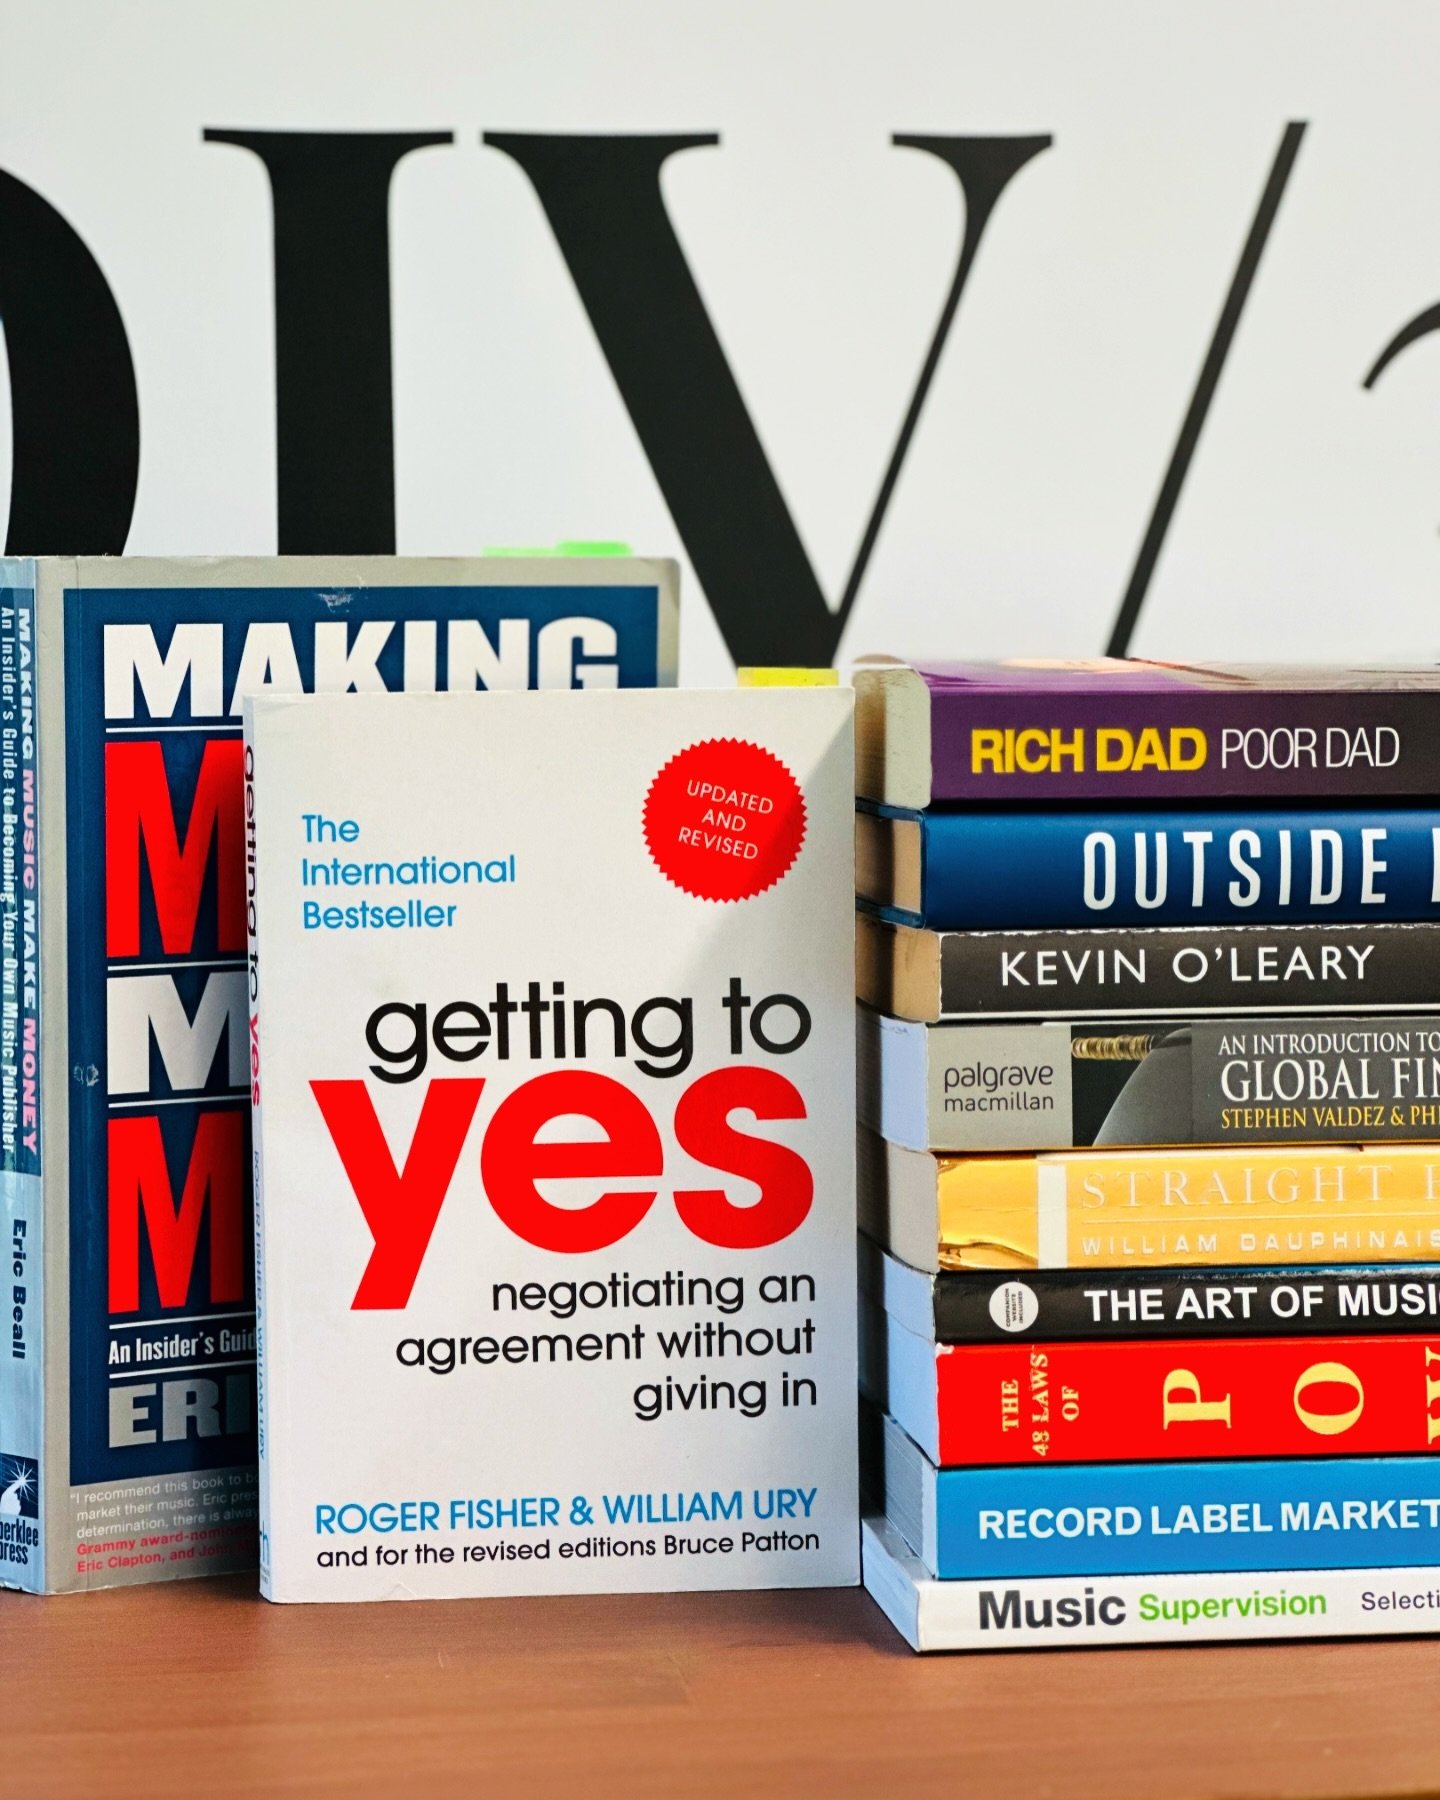 A few books from our library. Some words of wisdom that have helped us to navigate the world of music industry, finance and business.

What are your favorites? Drop your tips in the comments!

#bookstagram #books #booklover #finance #music #musicindu